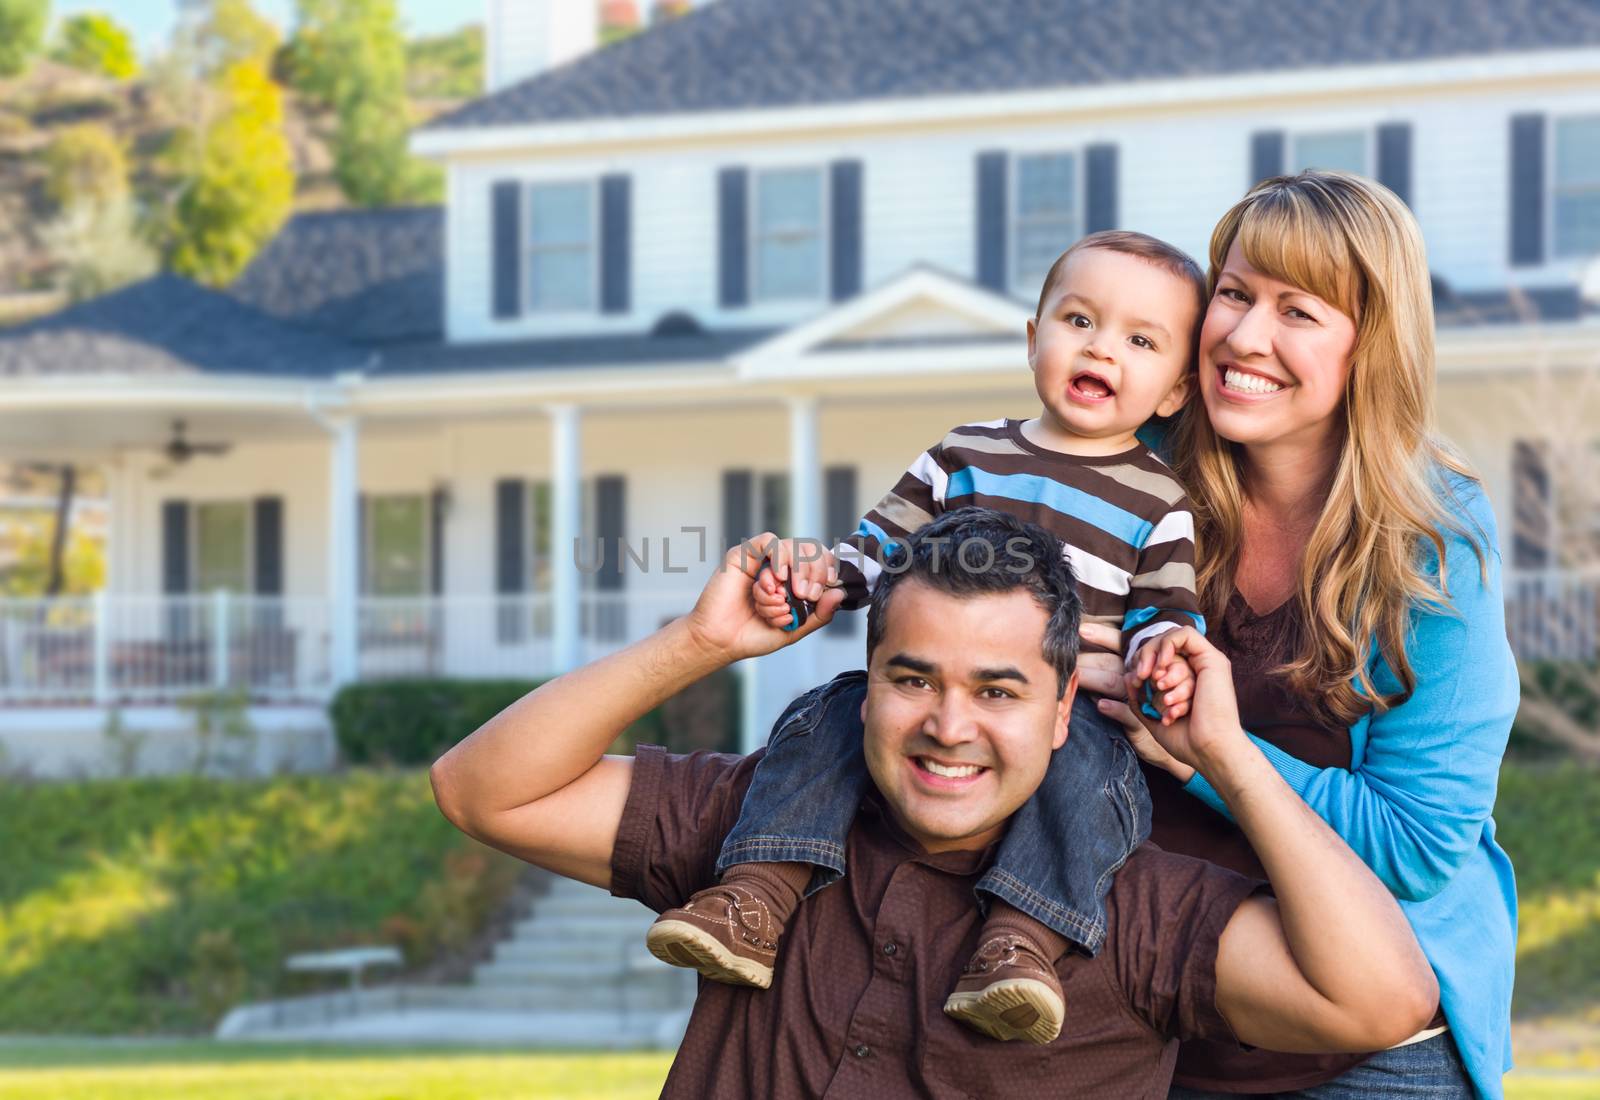 Happy Mixed Race Young Family in Front Yard of Beautiful House.